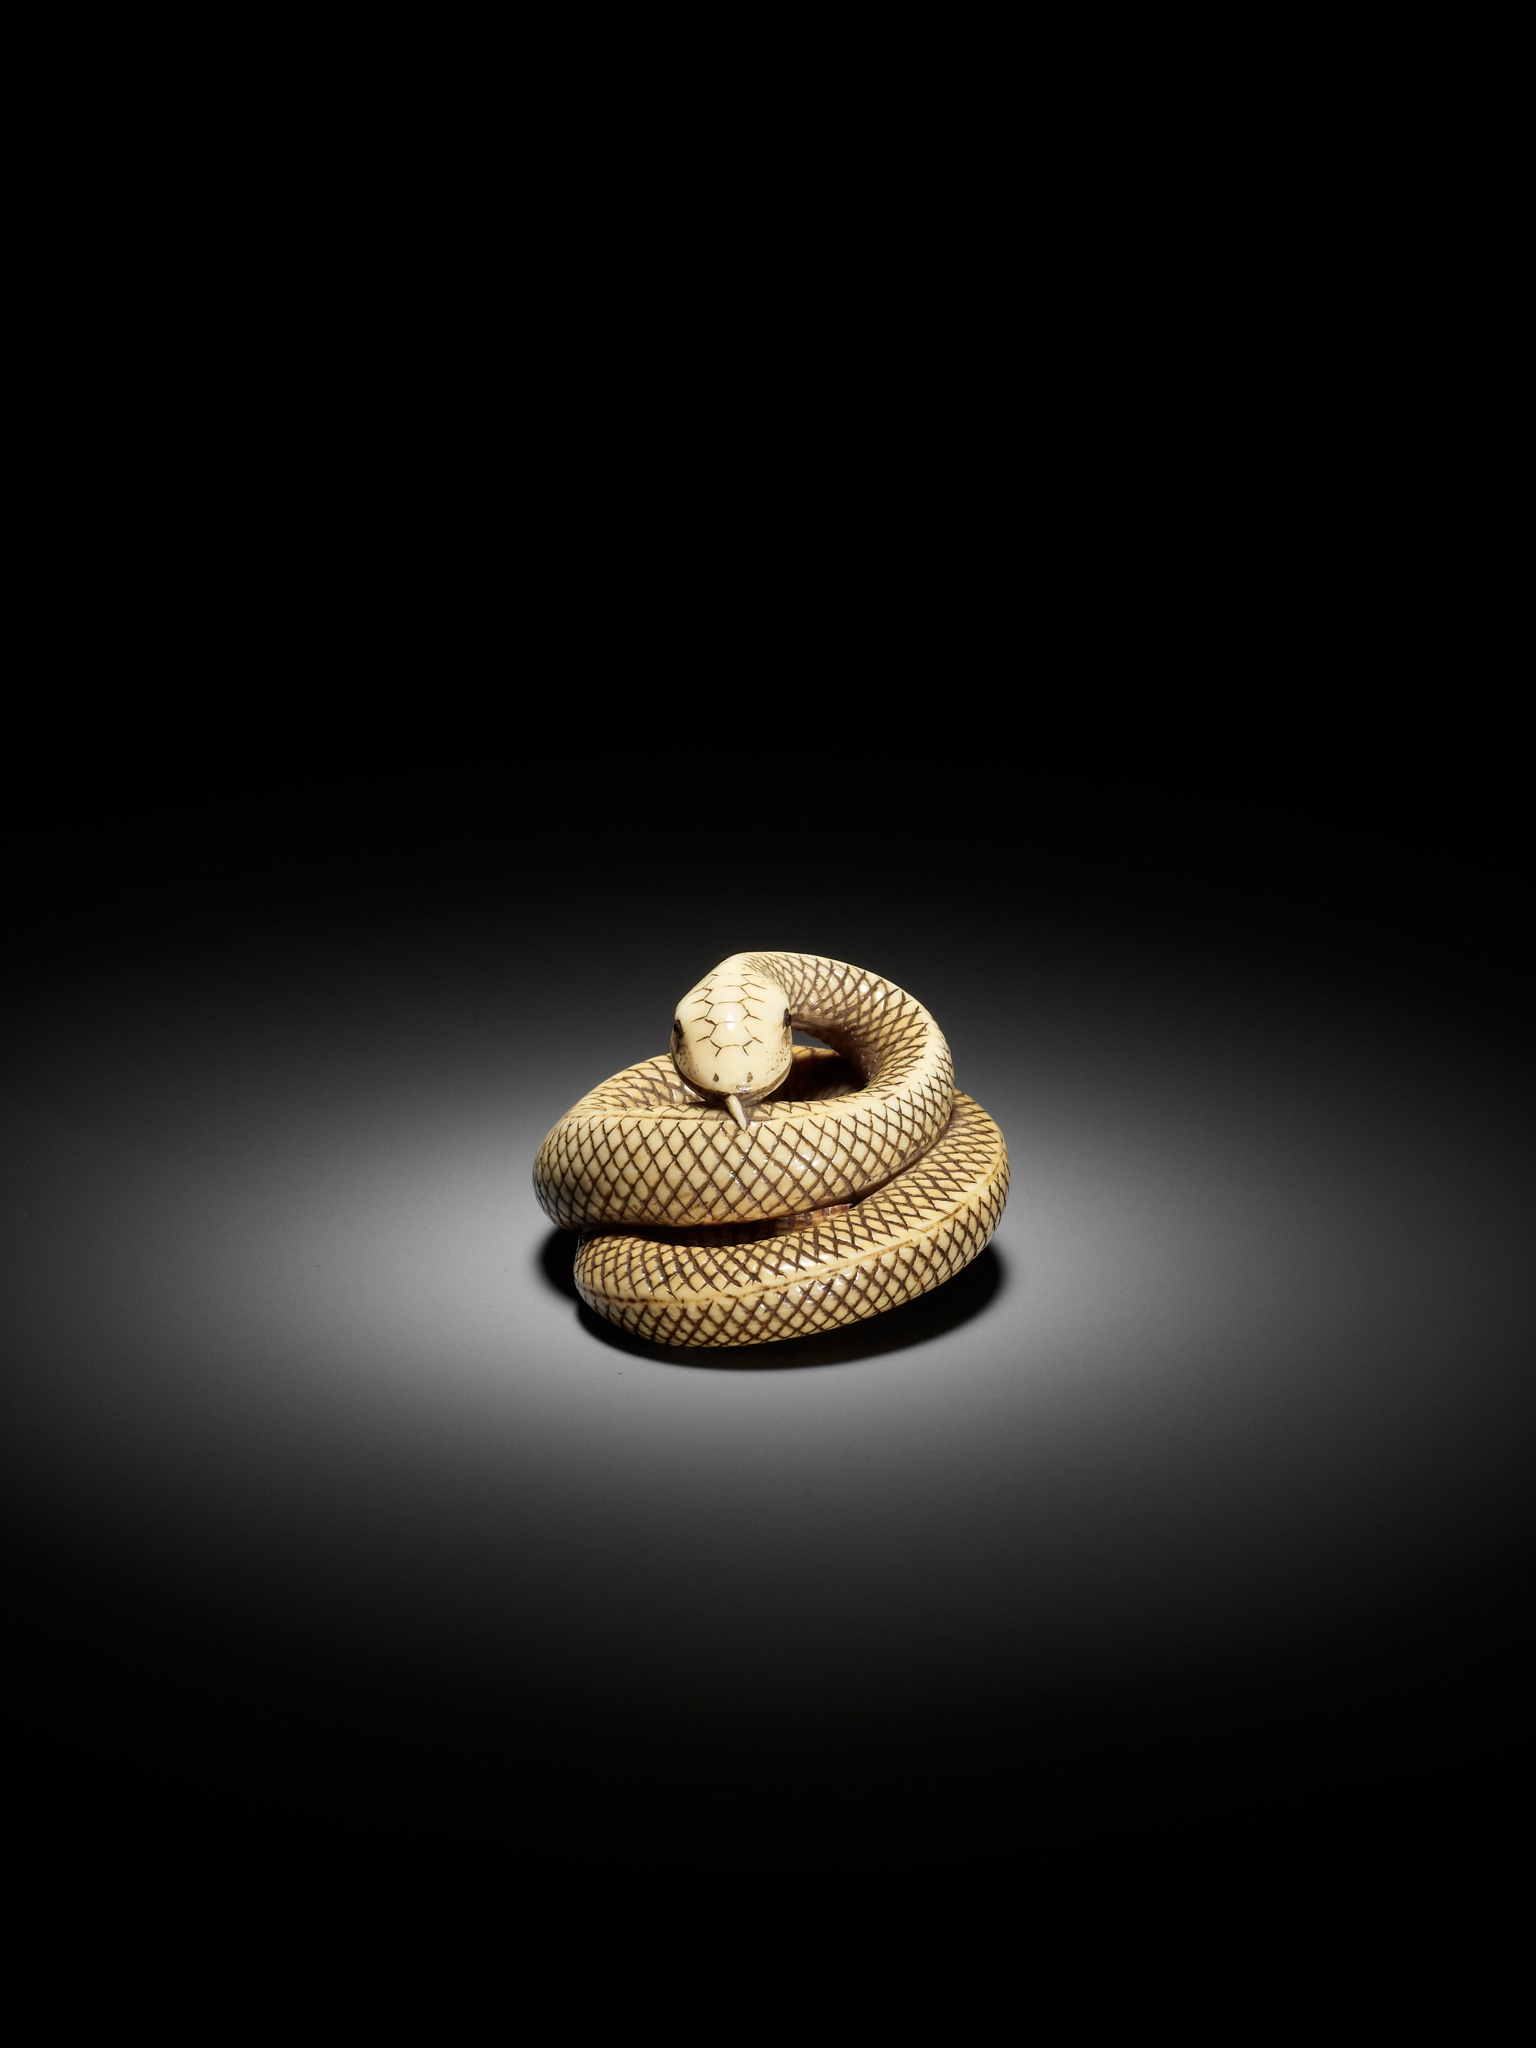 AN IVORY NETSUKE OF A COILED SNAKE, ATTRIBUTED TO OKATOMO - Image 12 of 16